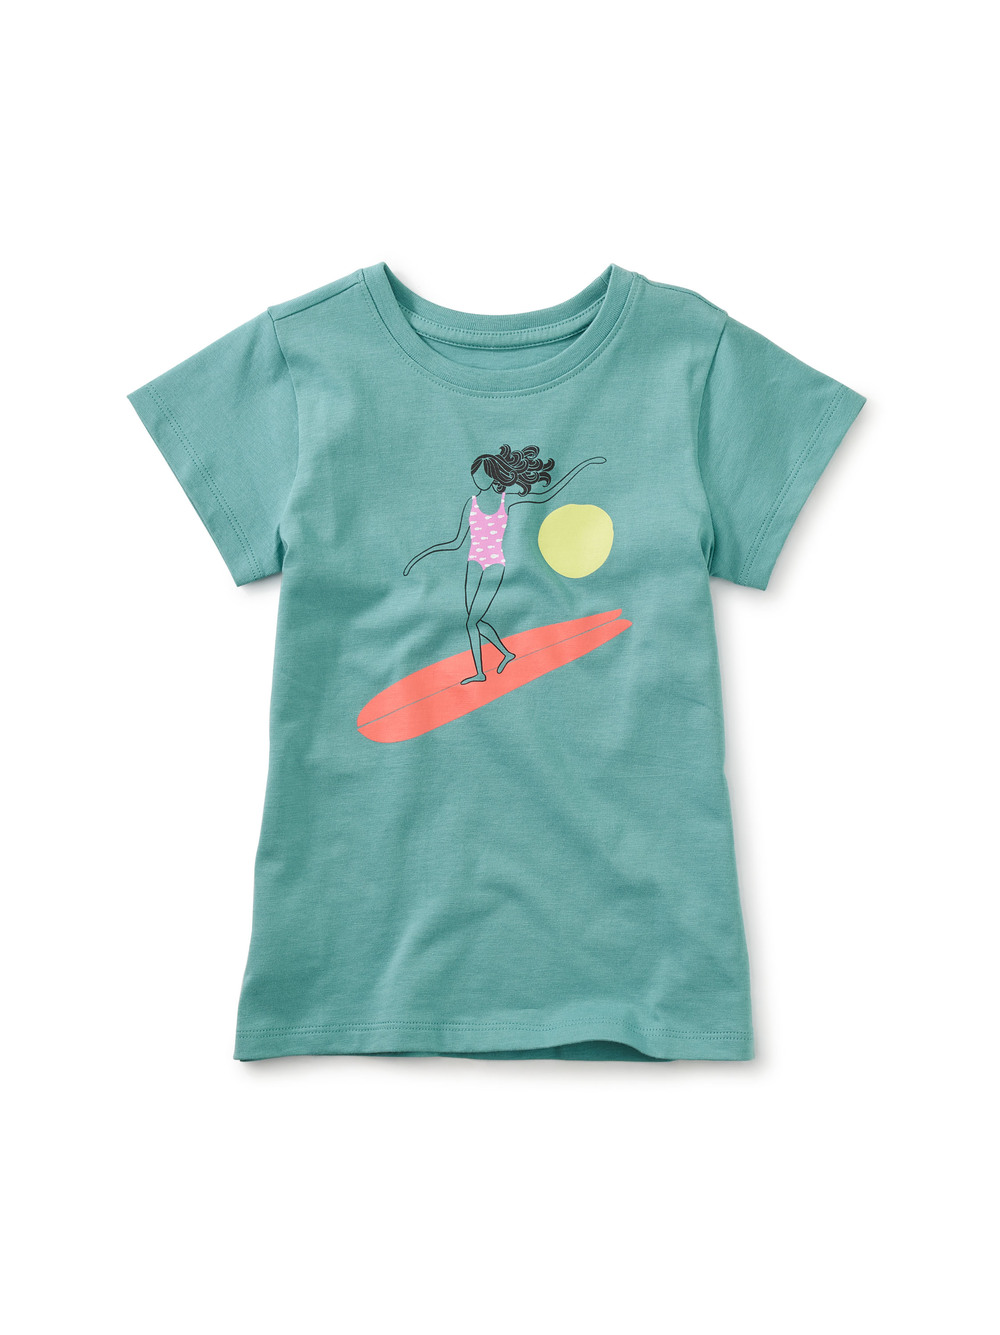 Lizzy Surfer Girl Graphic Tee